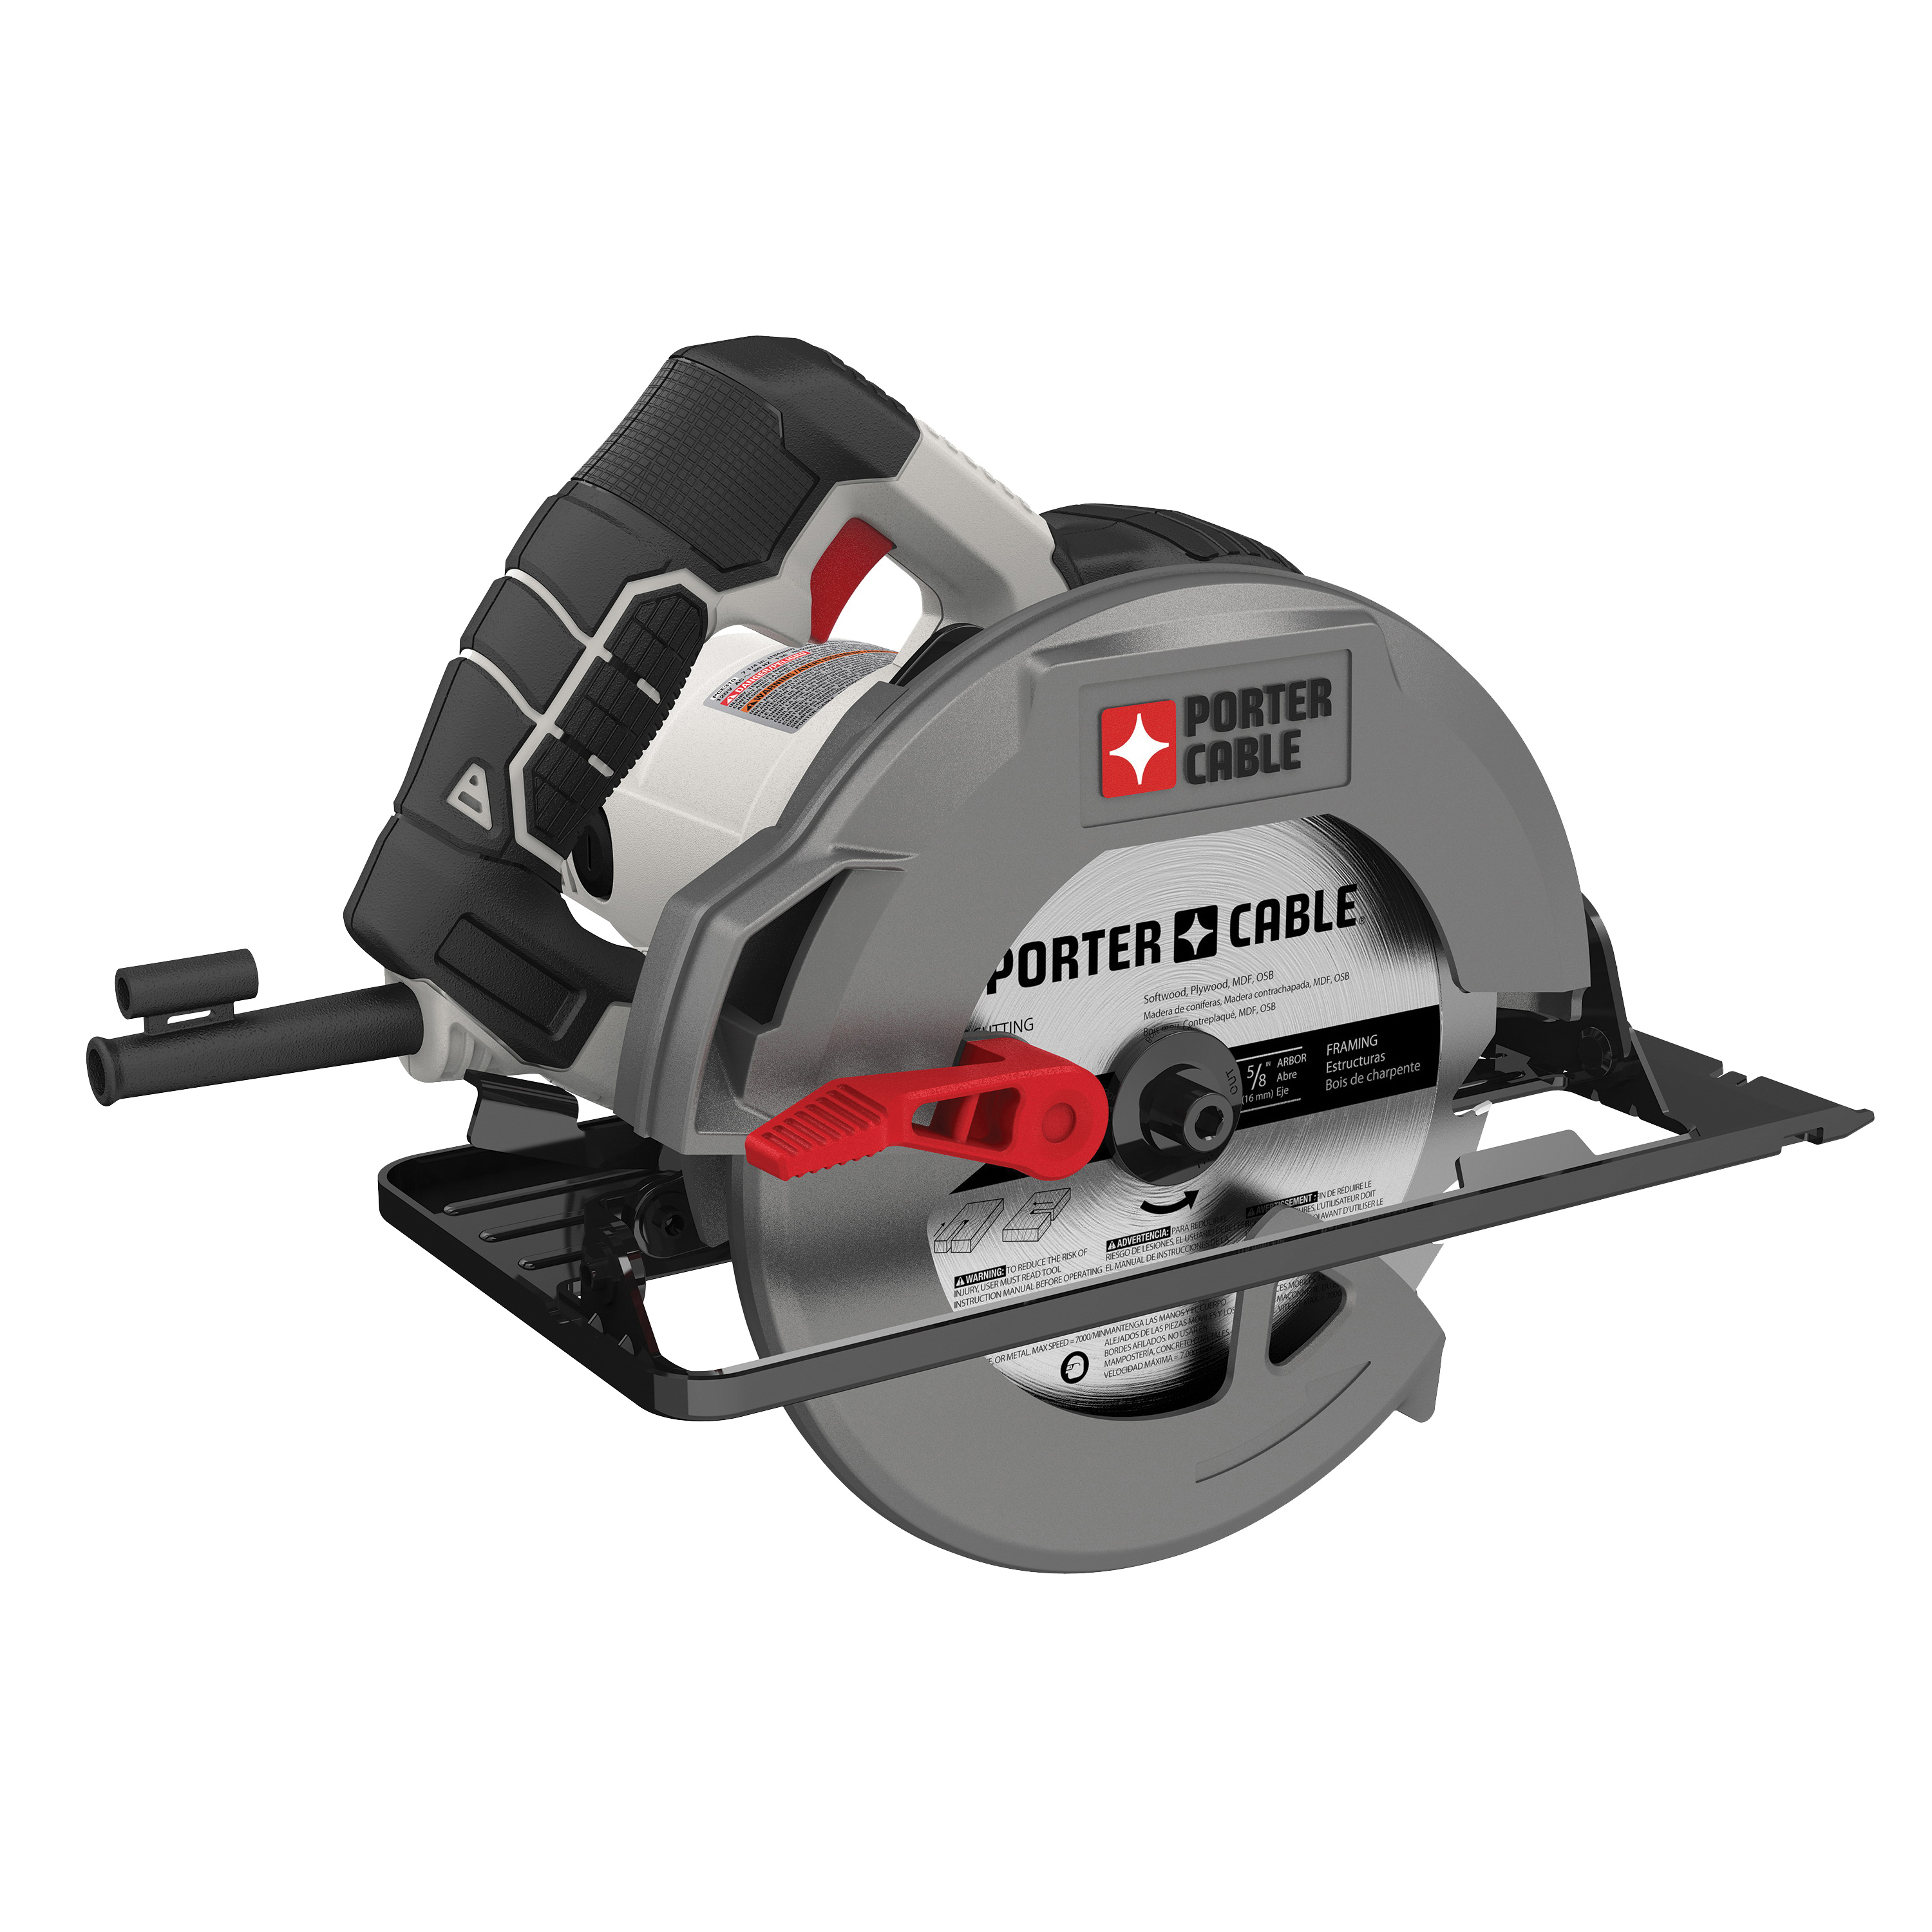 Genesis GCS130 13-Amp 7-1 4-In. Circular Saw with 24T Carbide Tipped Blade, Rip Guide, Blade Wrench, and Year - 3